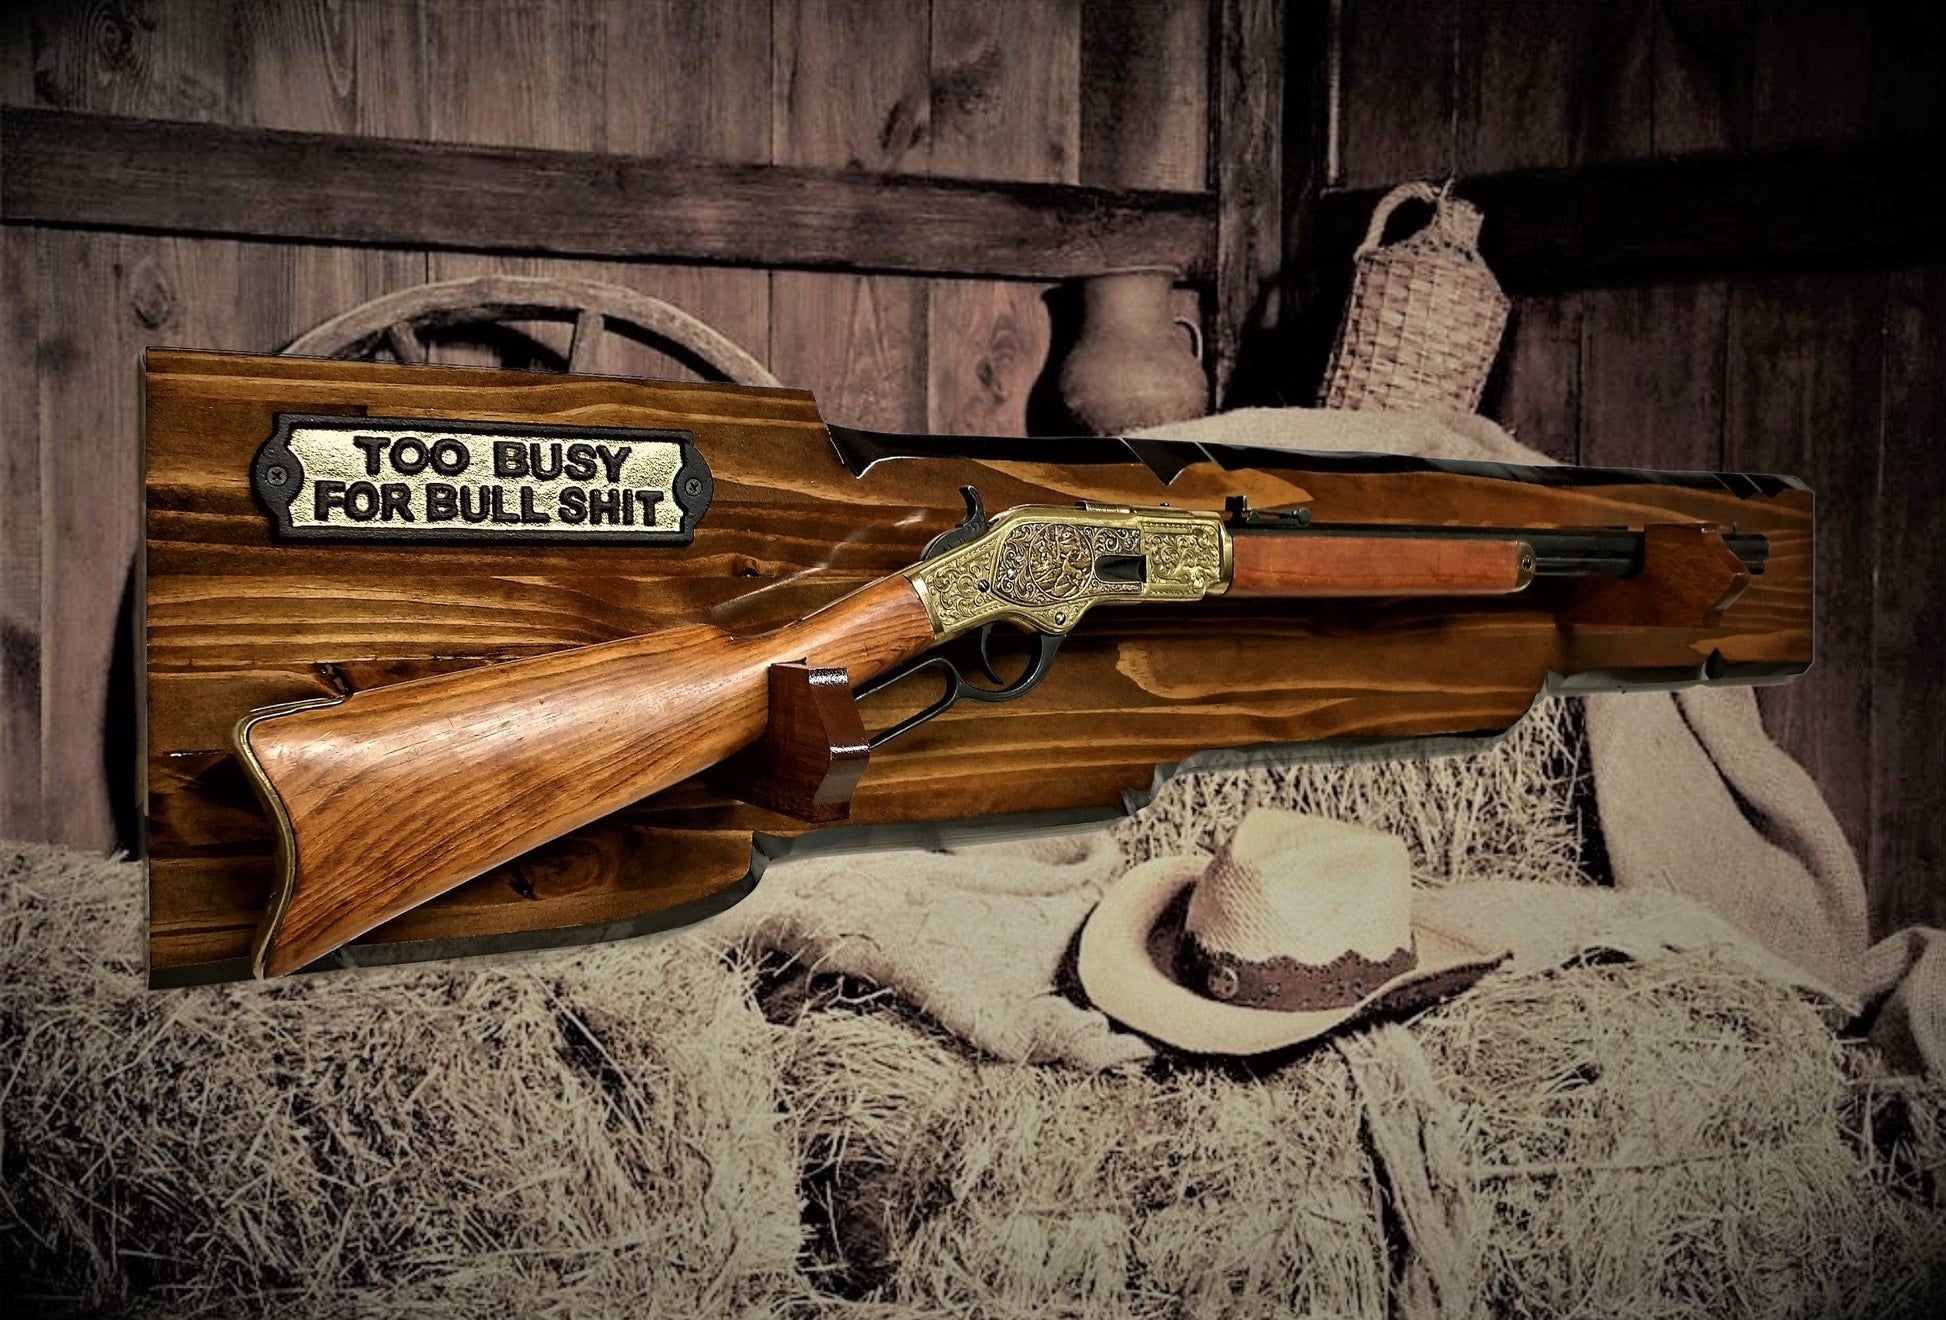 walkerwoodgifts gun rack Unique Gun Display Designed for Lever Action Rifle "Too Busy For BS" Great Man Cave Western Decor